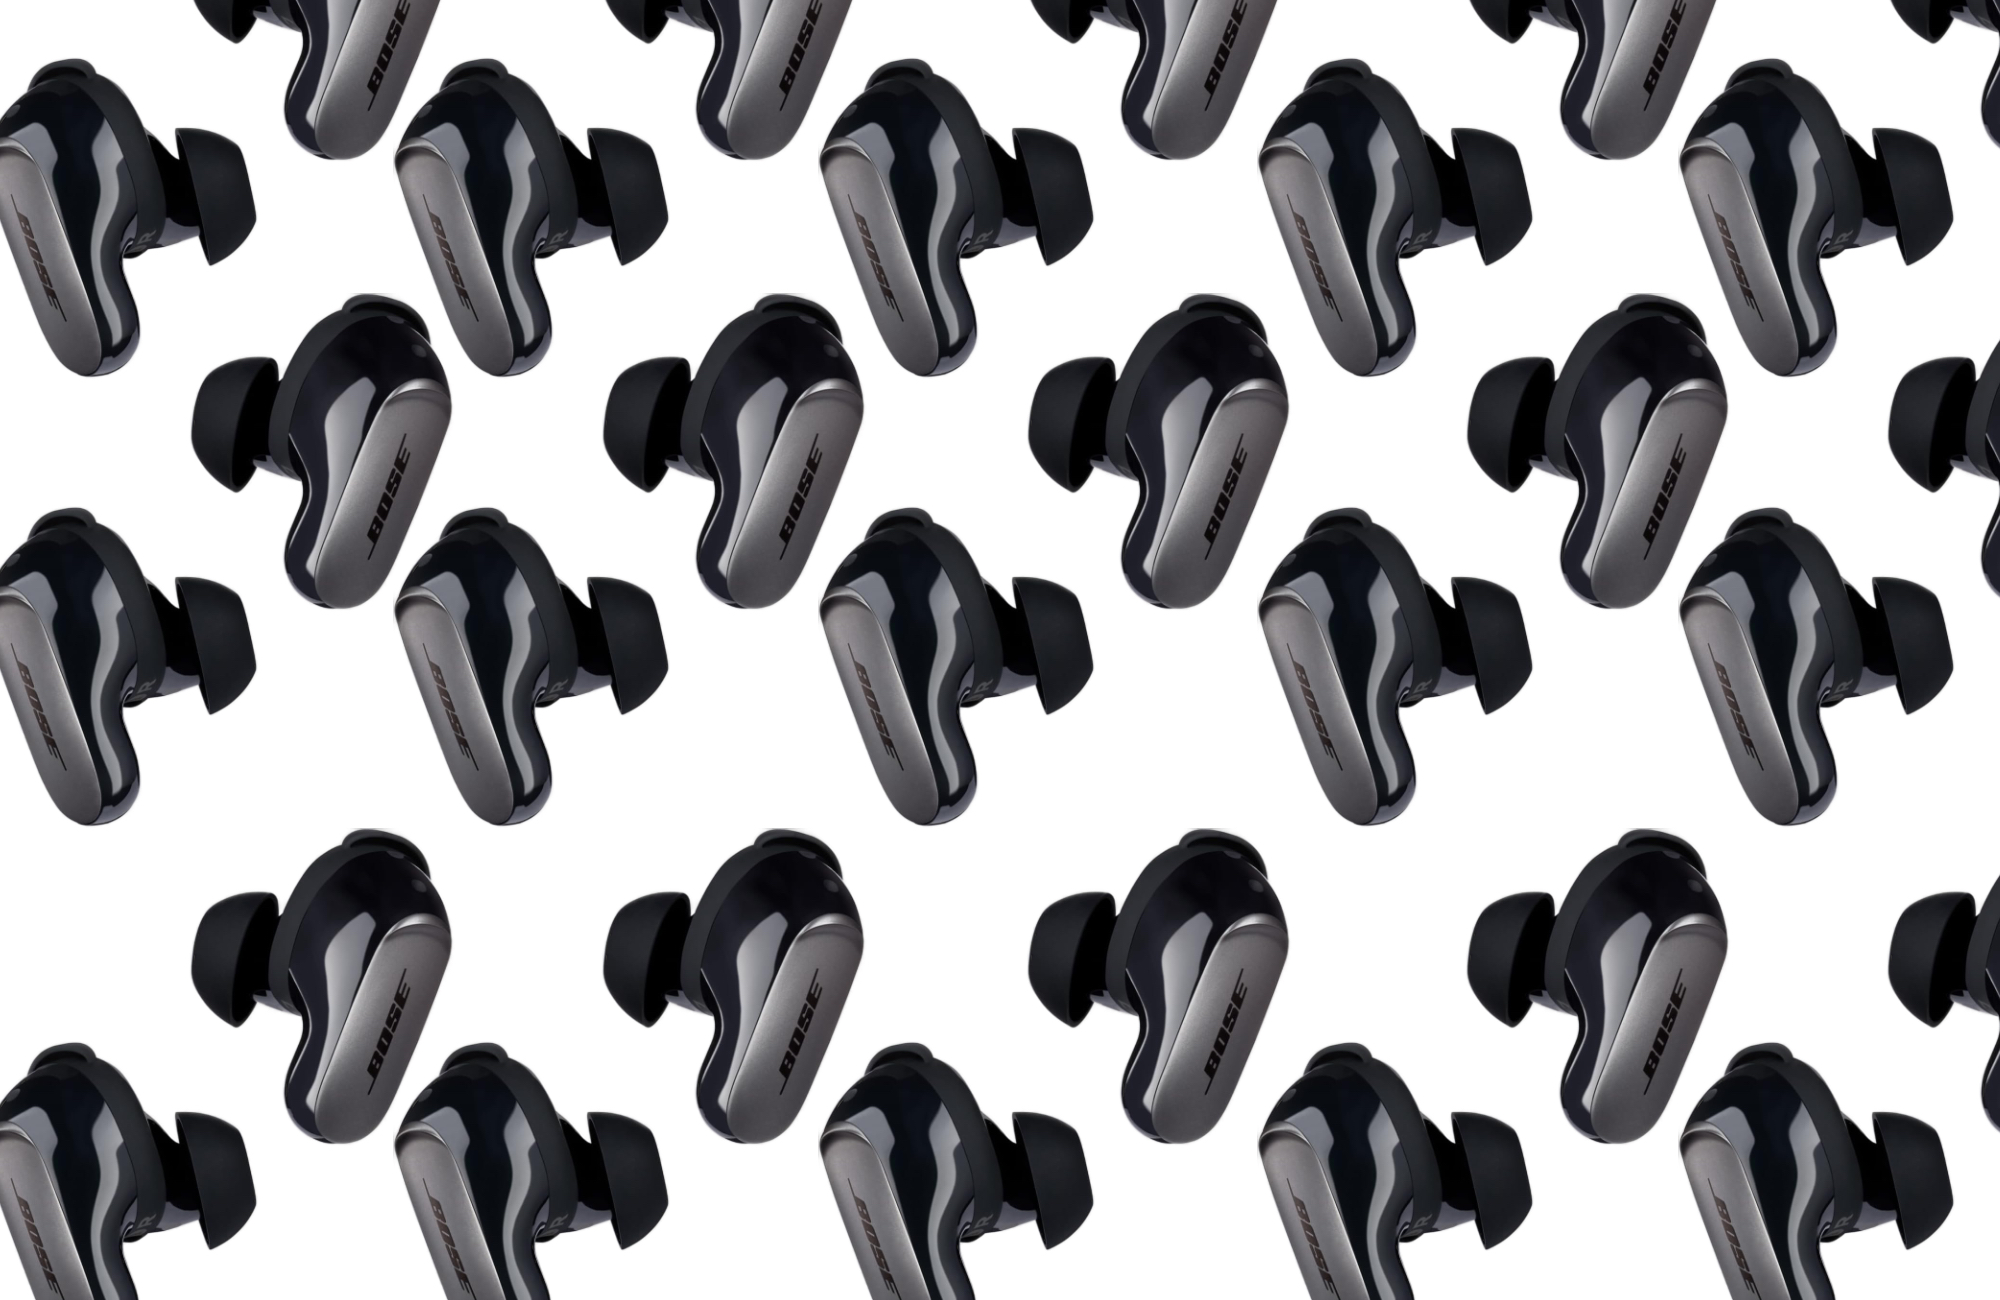 Bose QuietComfort Ultra Earbuds in a tiled format.